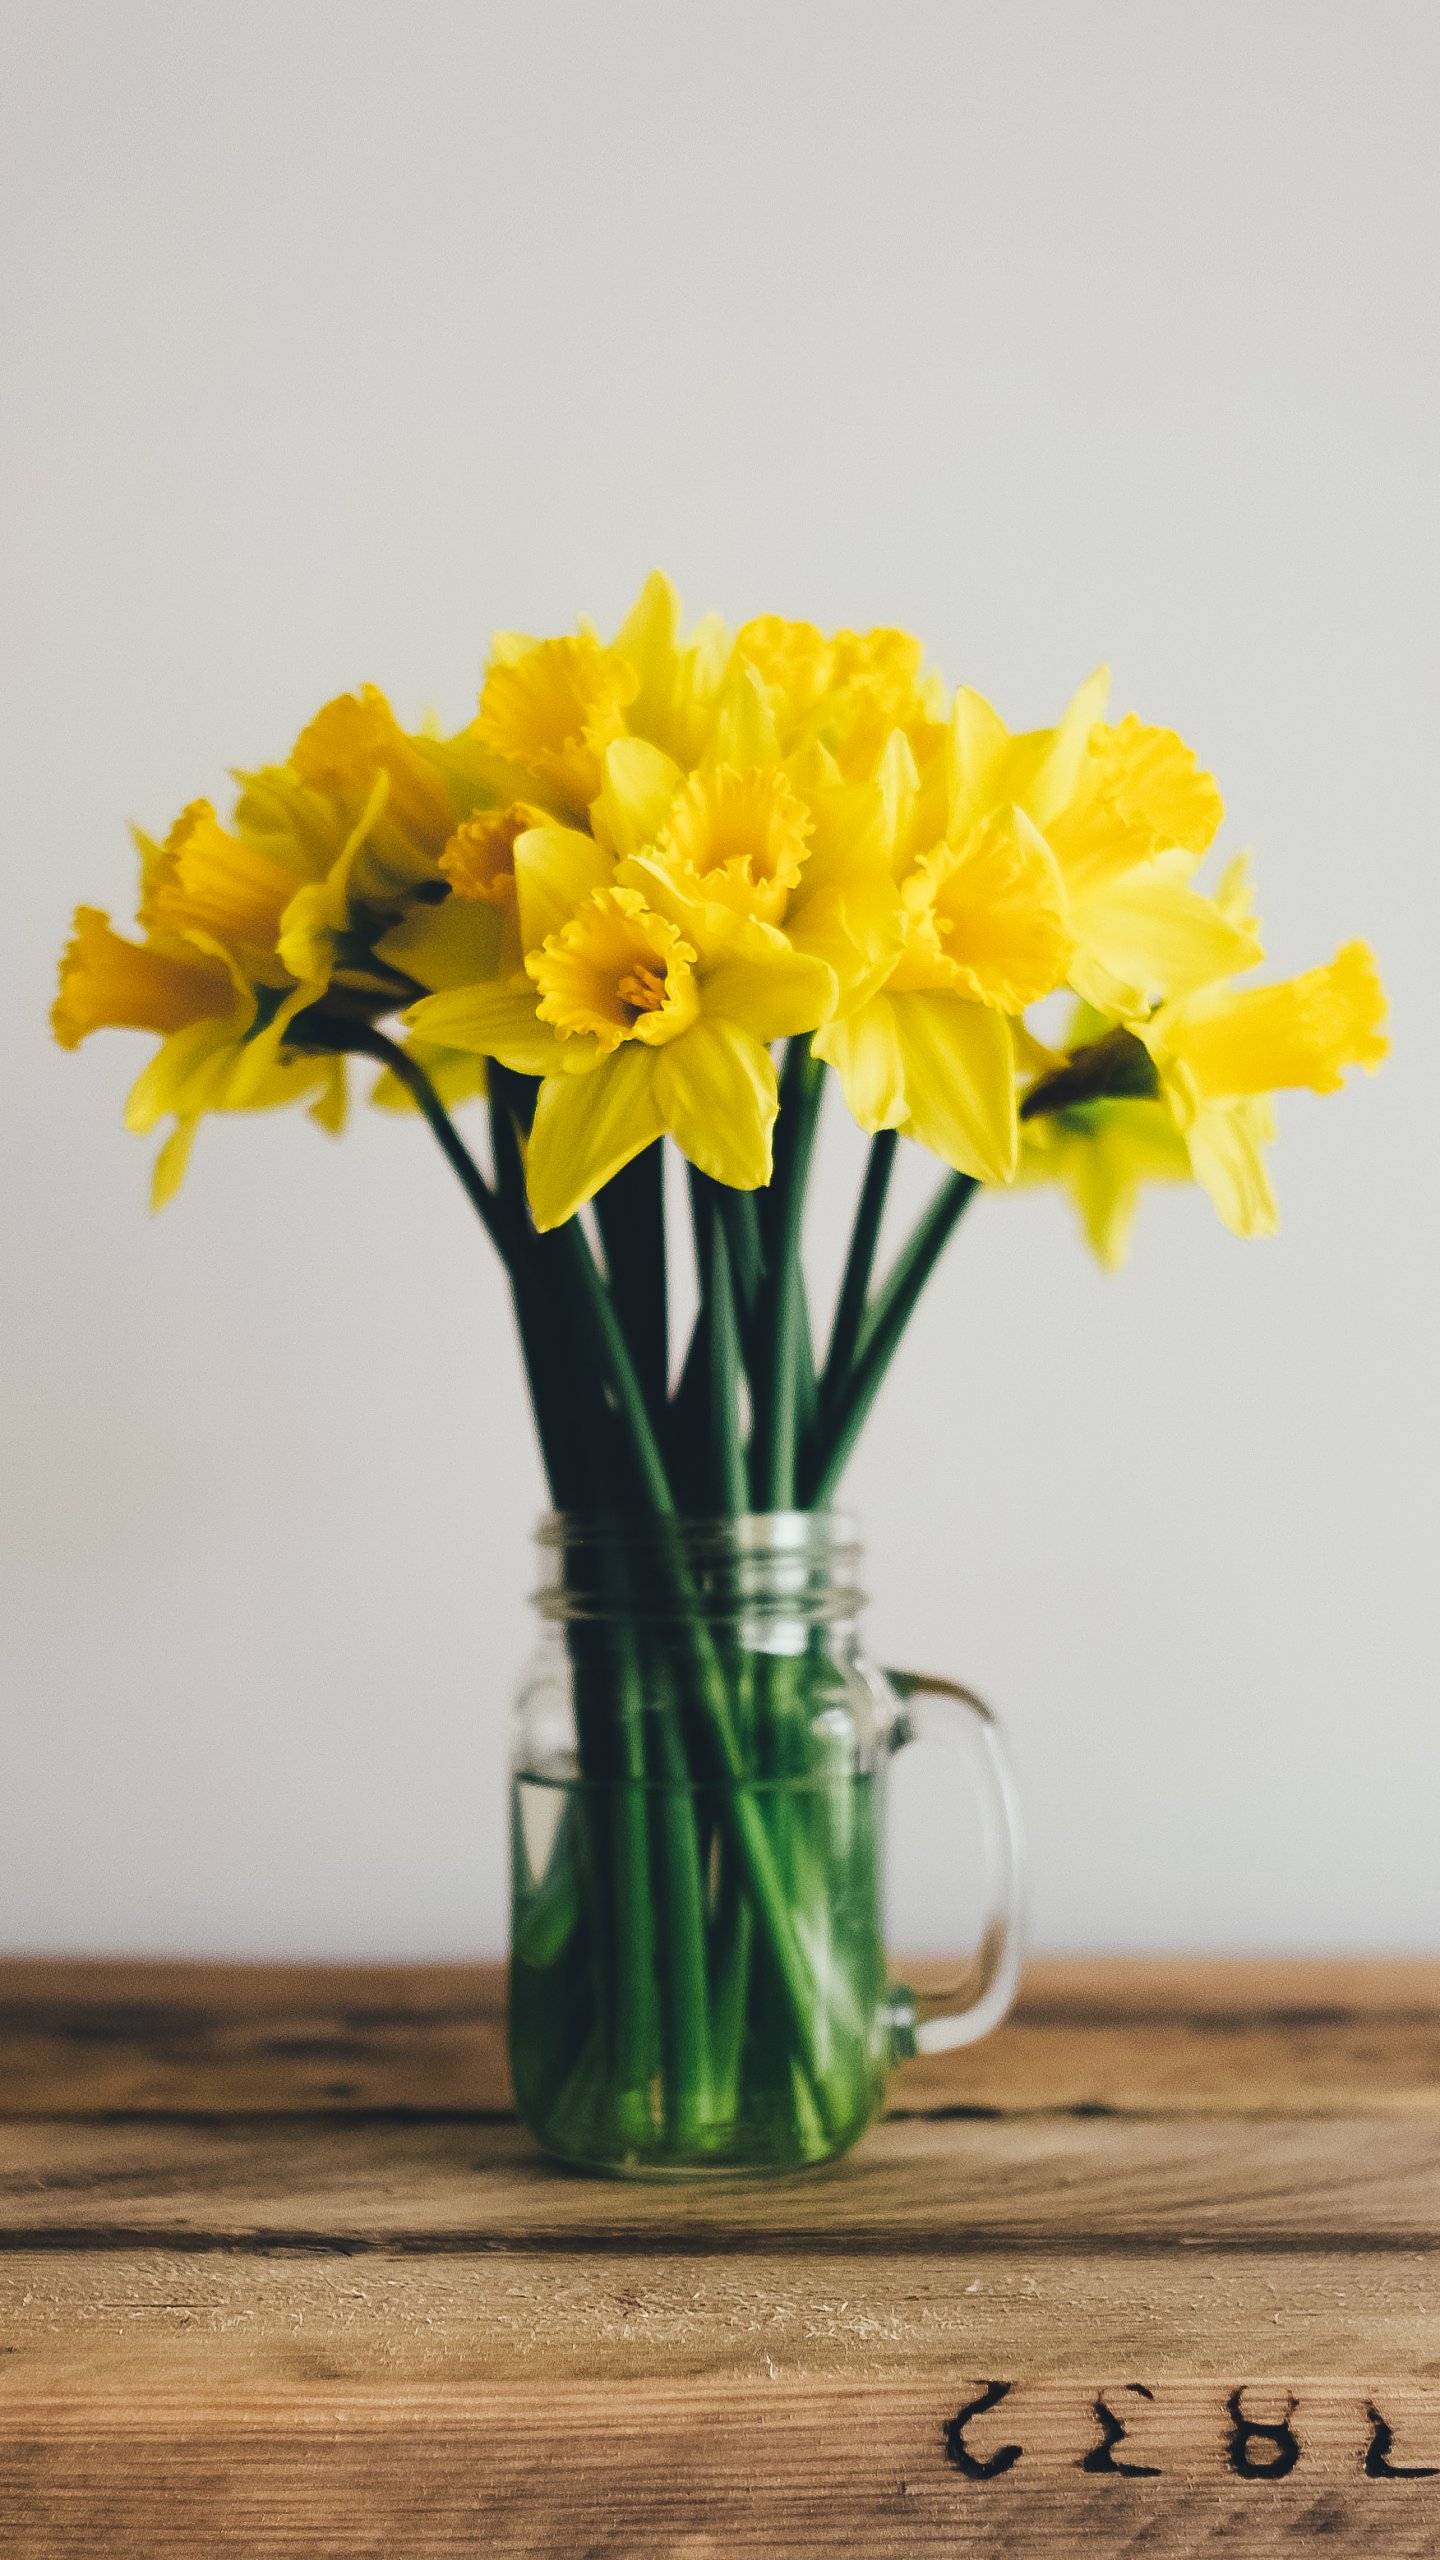 Daffodils Wallpaper iPhone Android Desktop Background